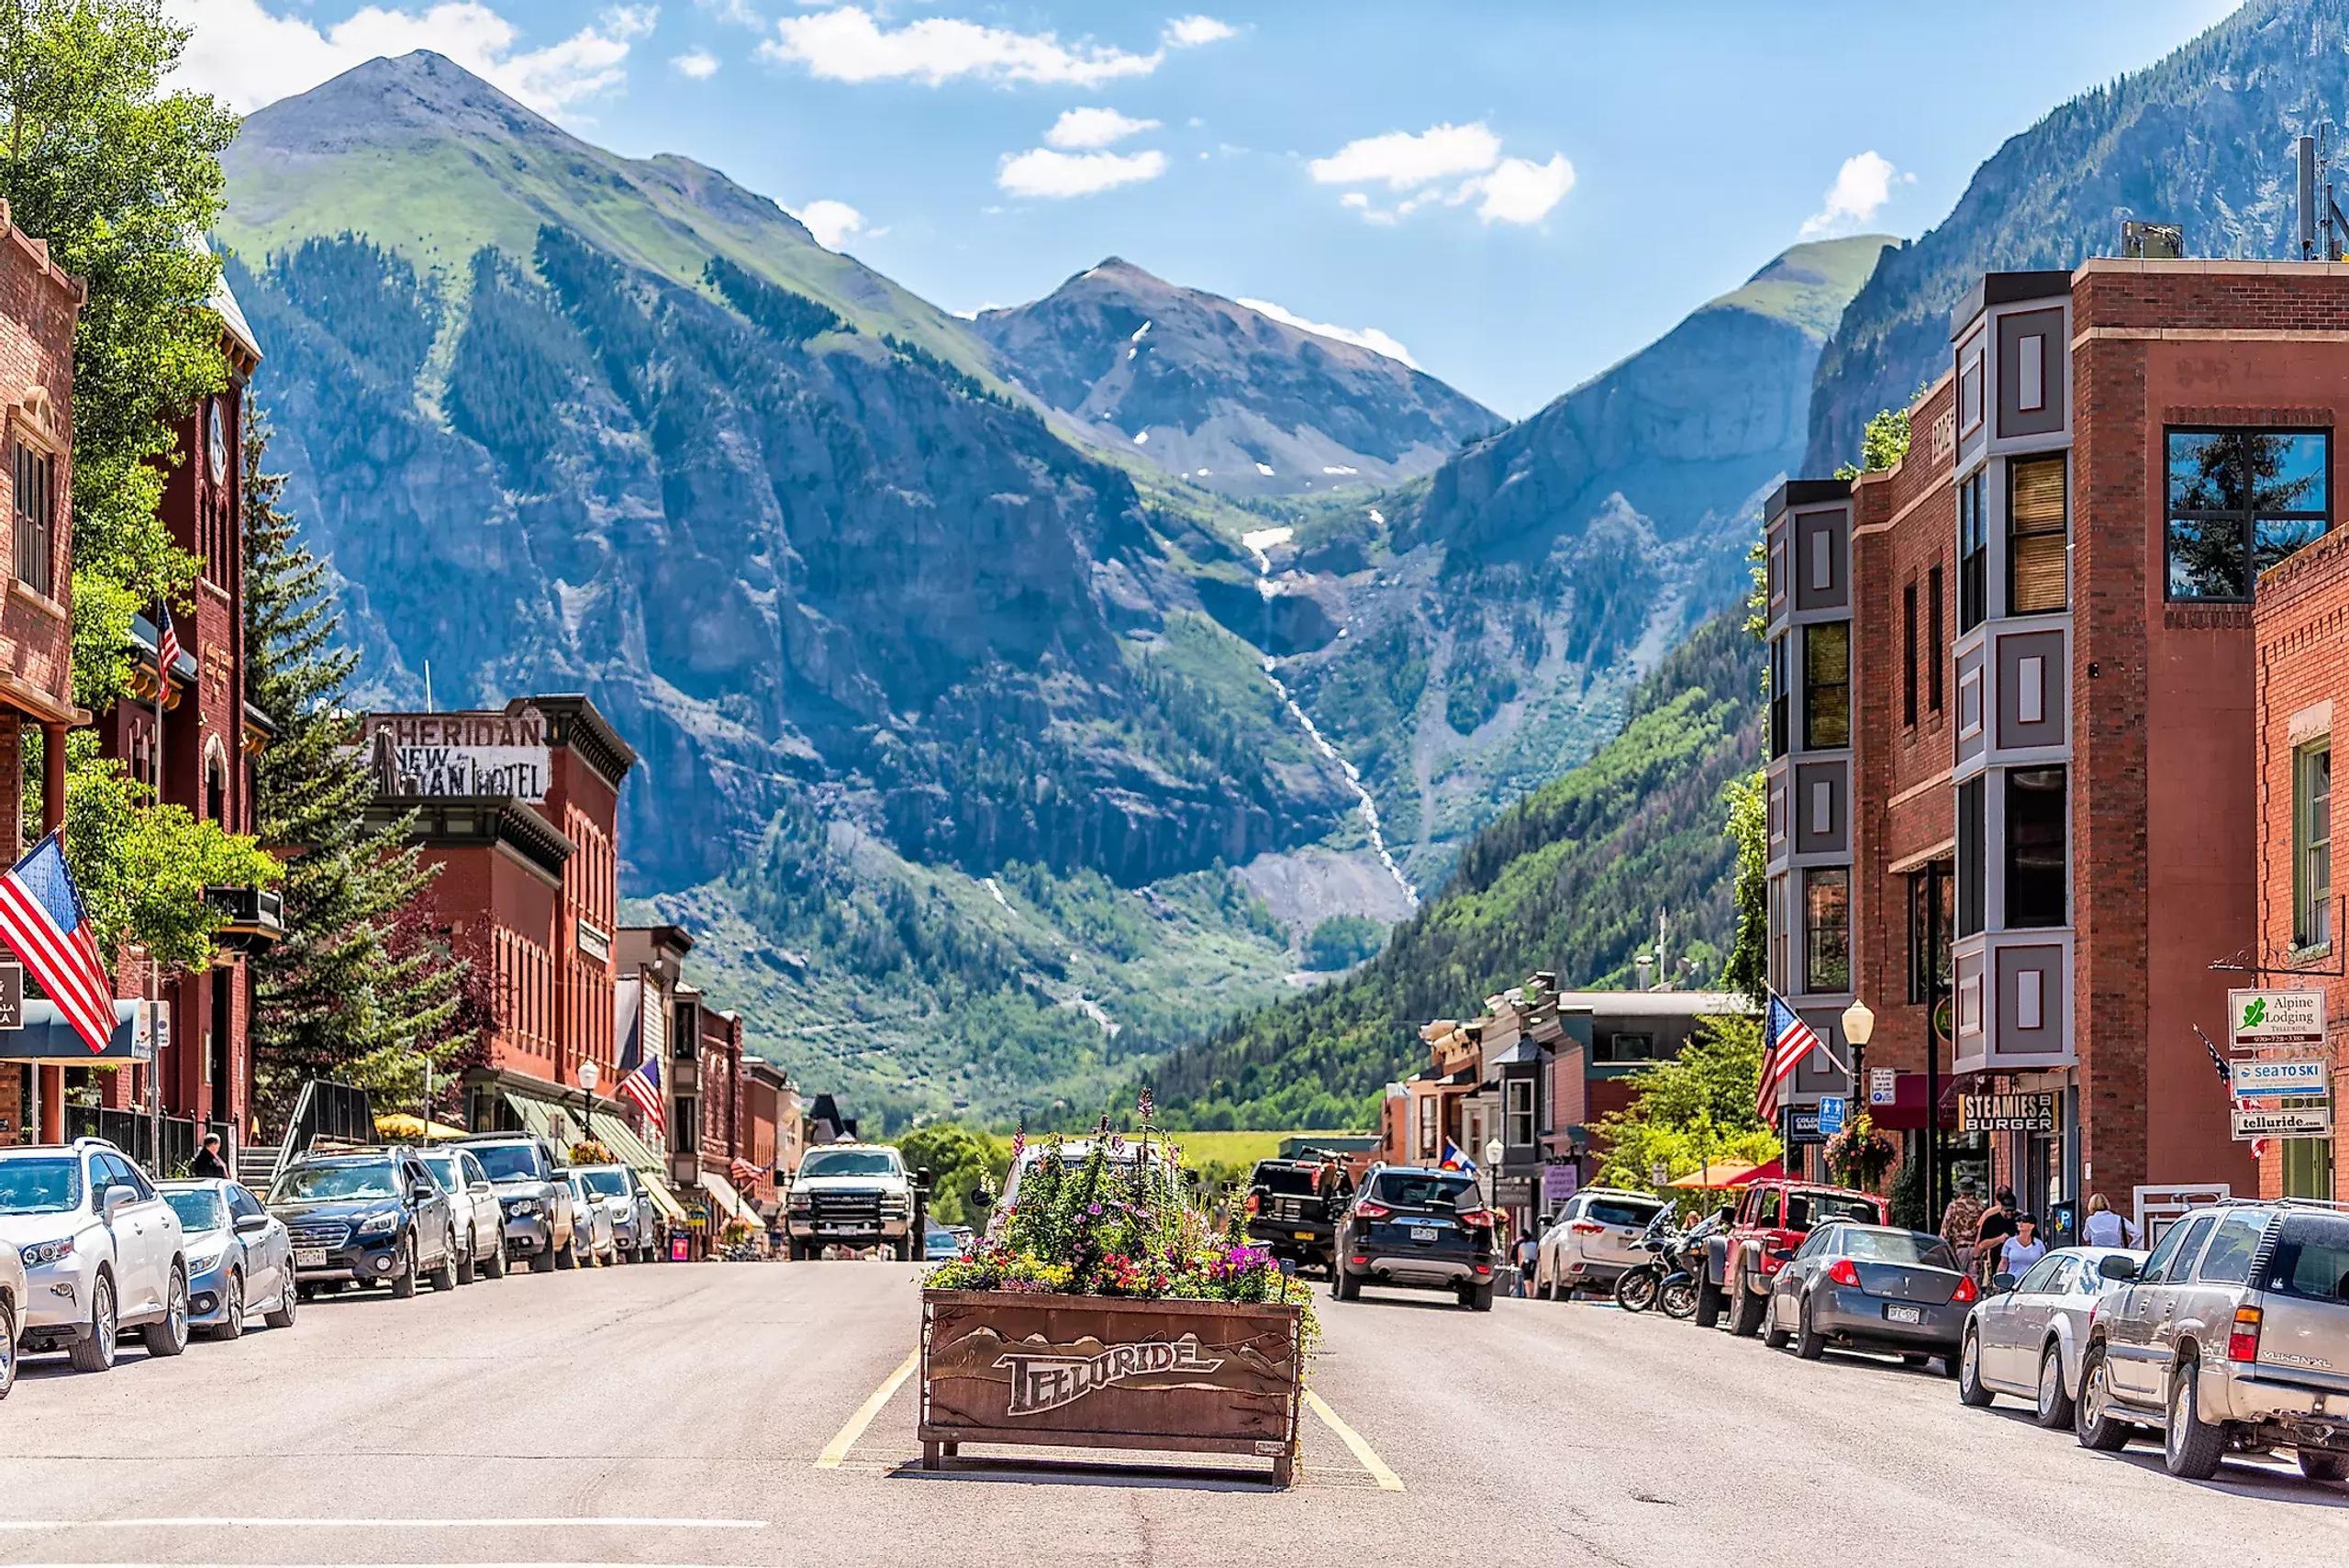 Downtown Telluride with Mountains in the background